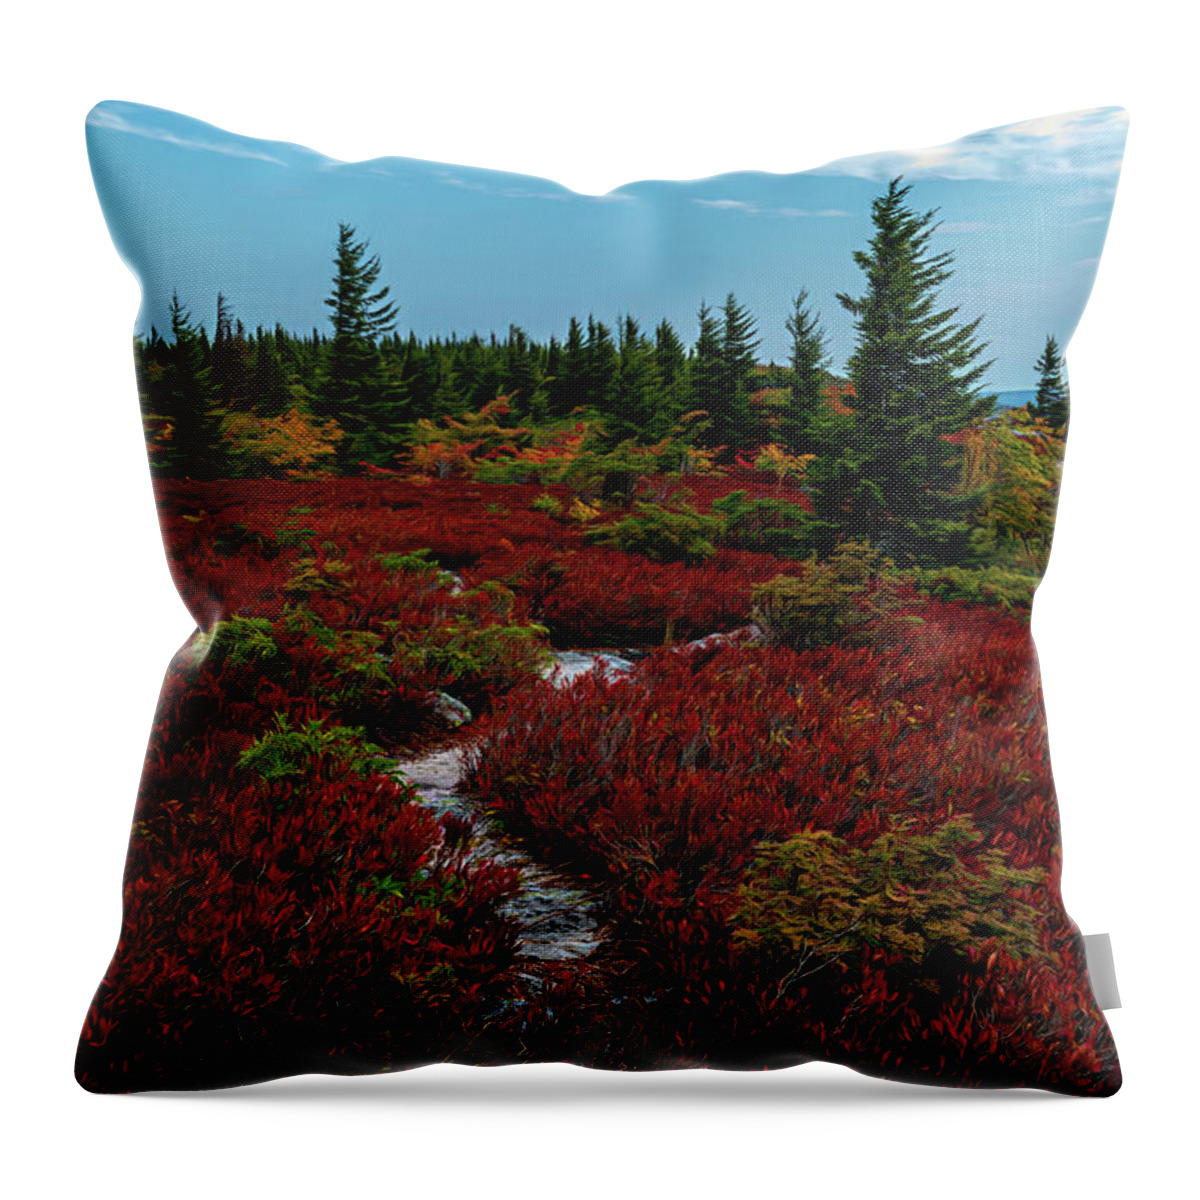 Dolly Sods Wilderness Throw Pillow featuring the photograph Winding into Dolly Sods Wilderness by Jaki Miller